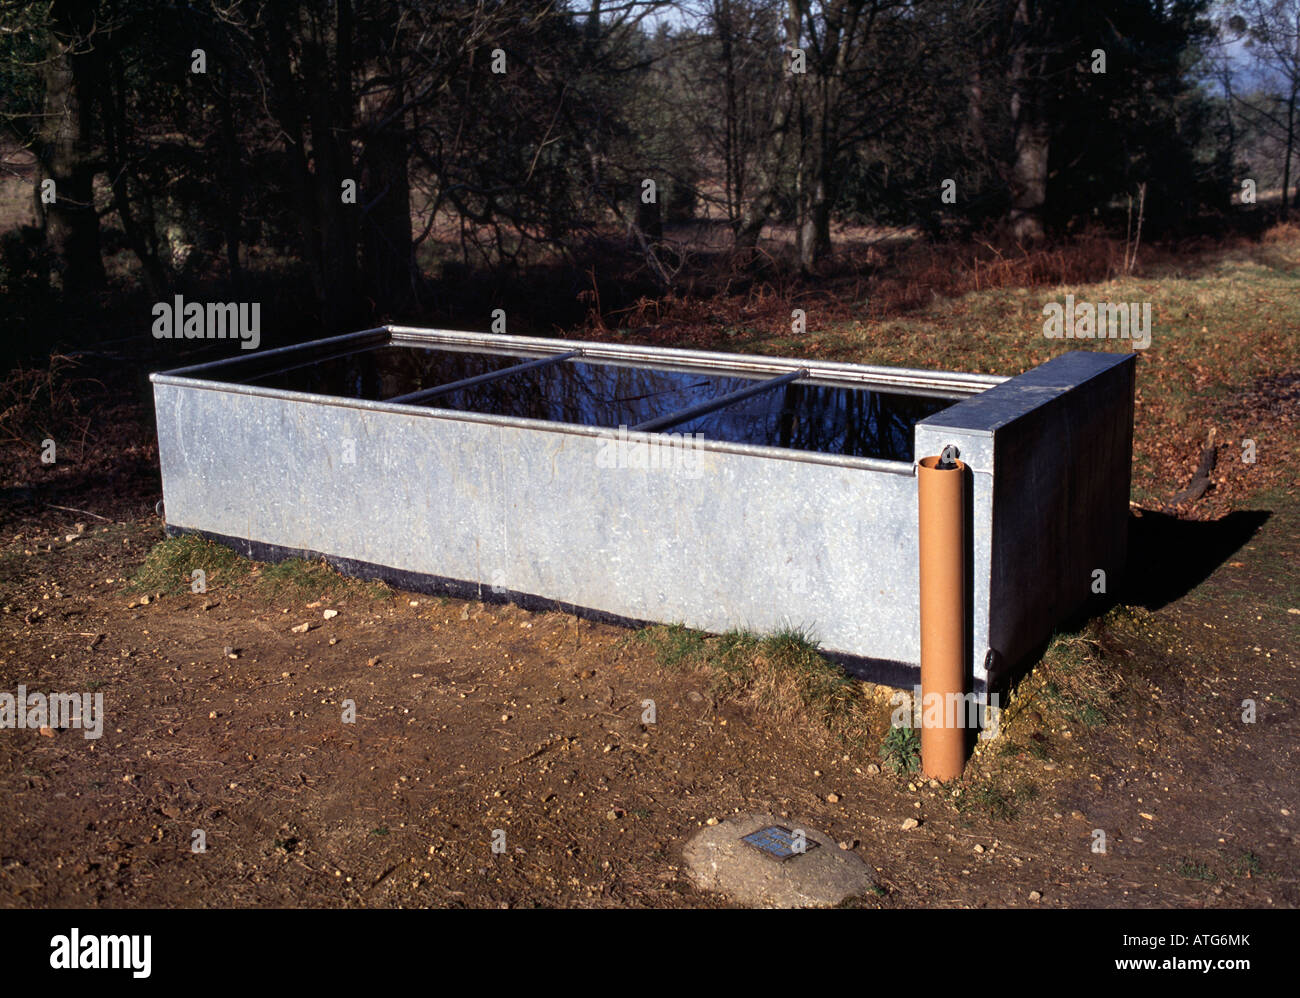 Water trough for horses. The Devils Punch Bowl, Hindhead, Surrey, England, UK. Stock Photo